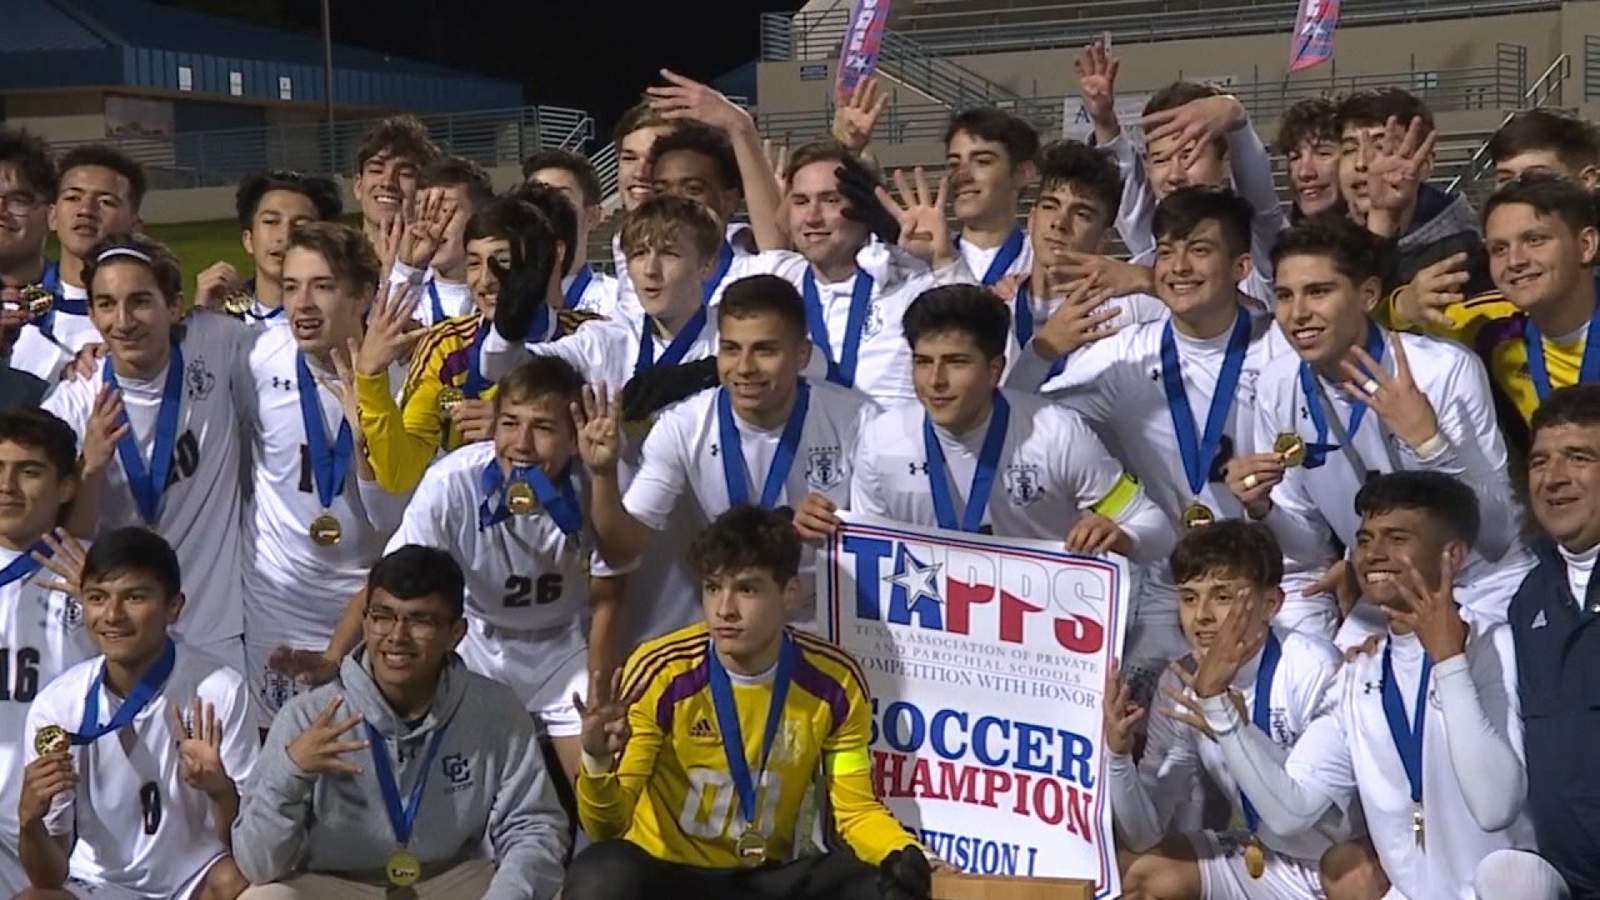 TAPPS State Soccer: Central Catholic 4-peats, TMI goes back-to-back